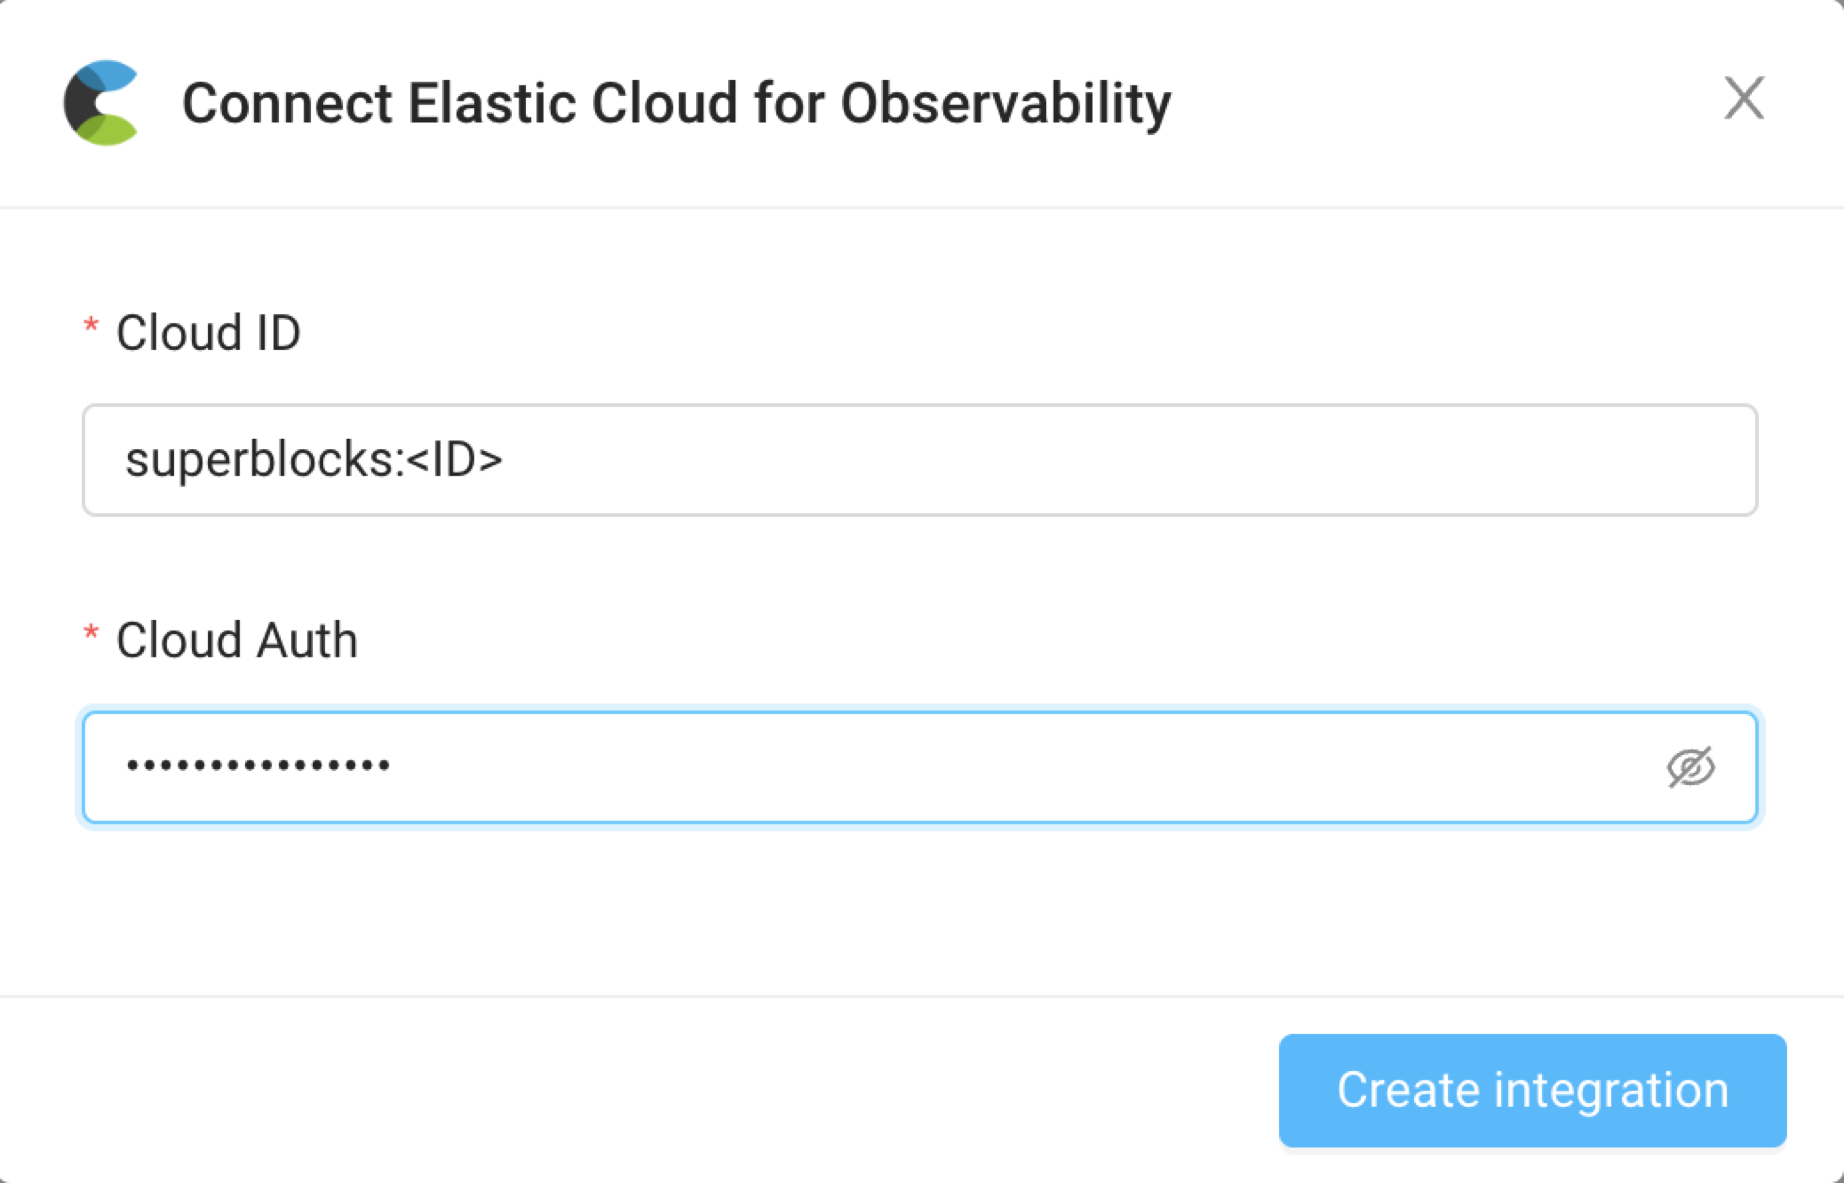 Connecting to Elastic Cloud